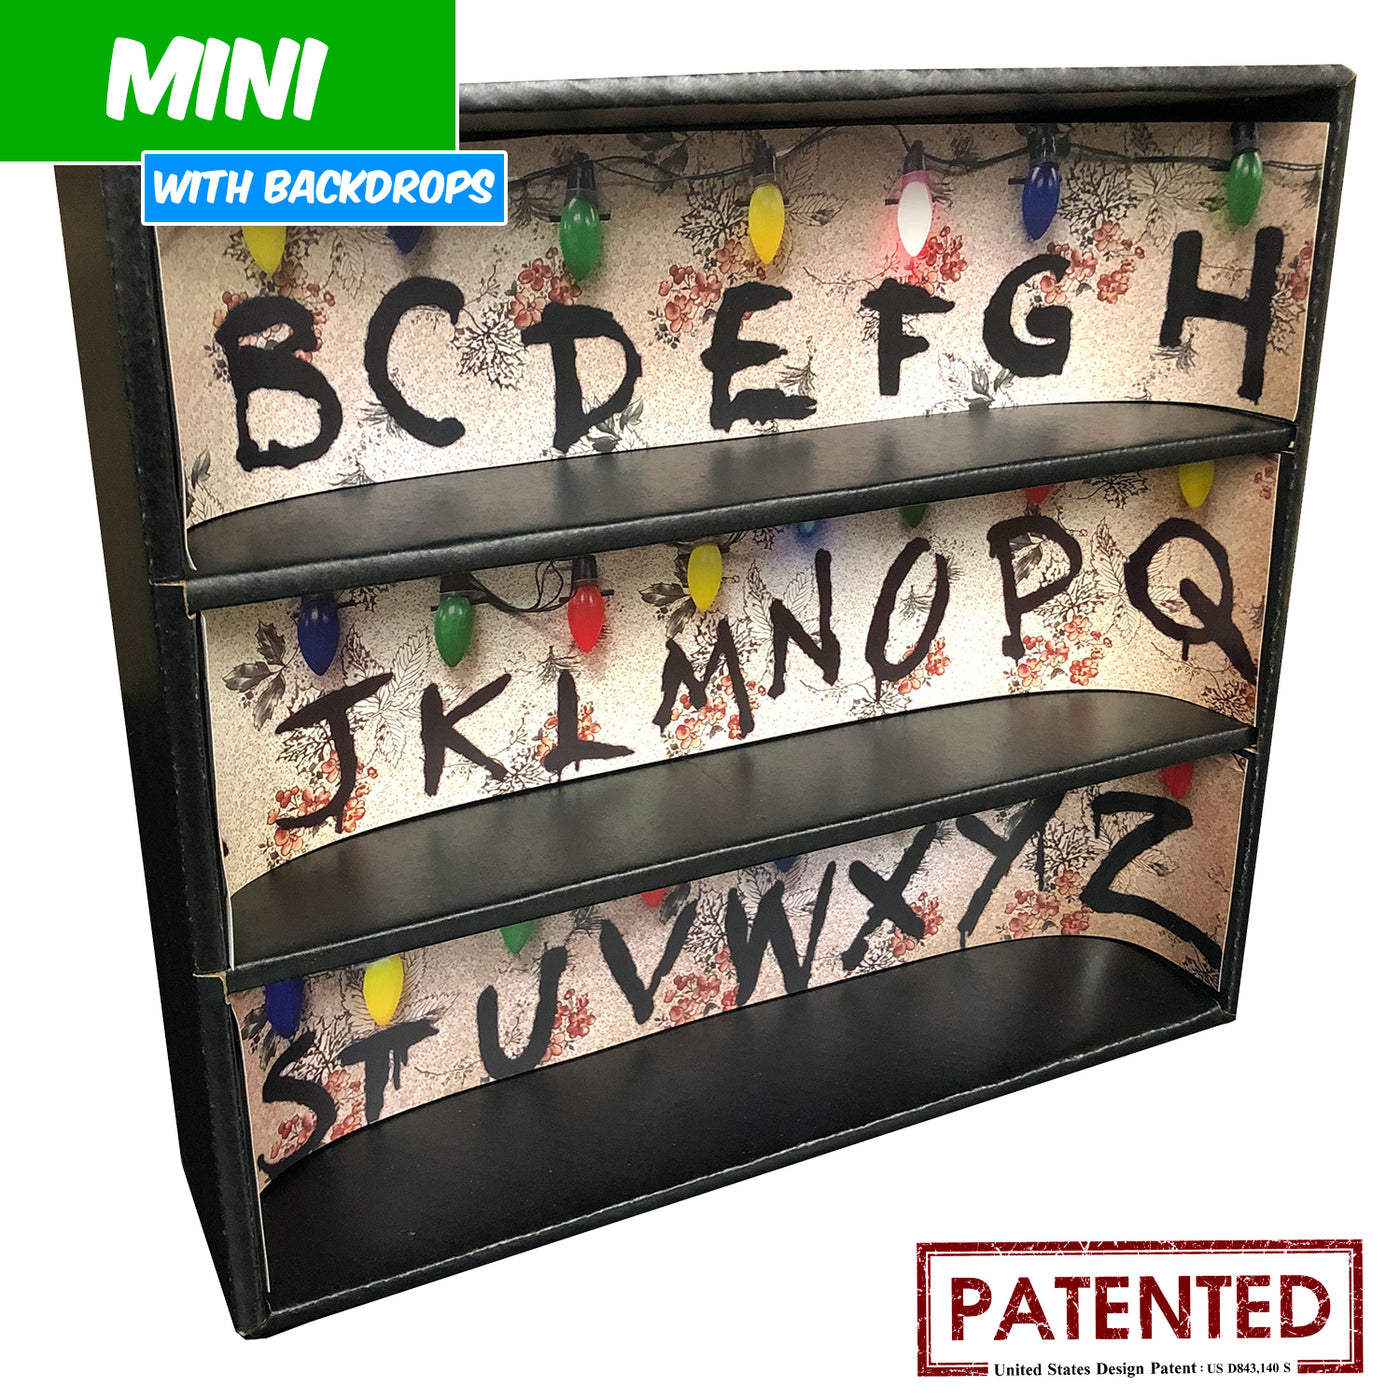 STRANGER THINGS - MINI Display Case for Small Toys with 3 Backdrop Inserts, Corrugated Cardboard - Display Geek